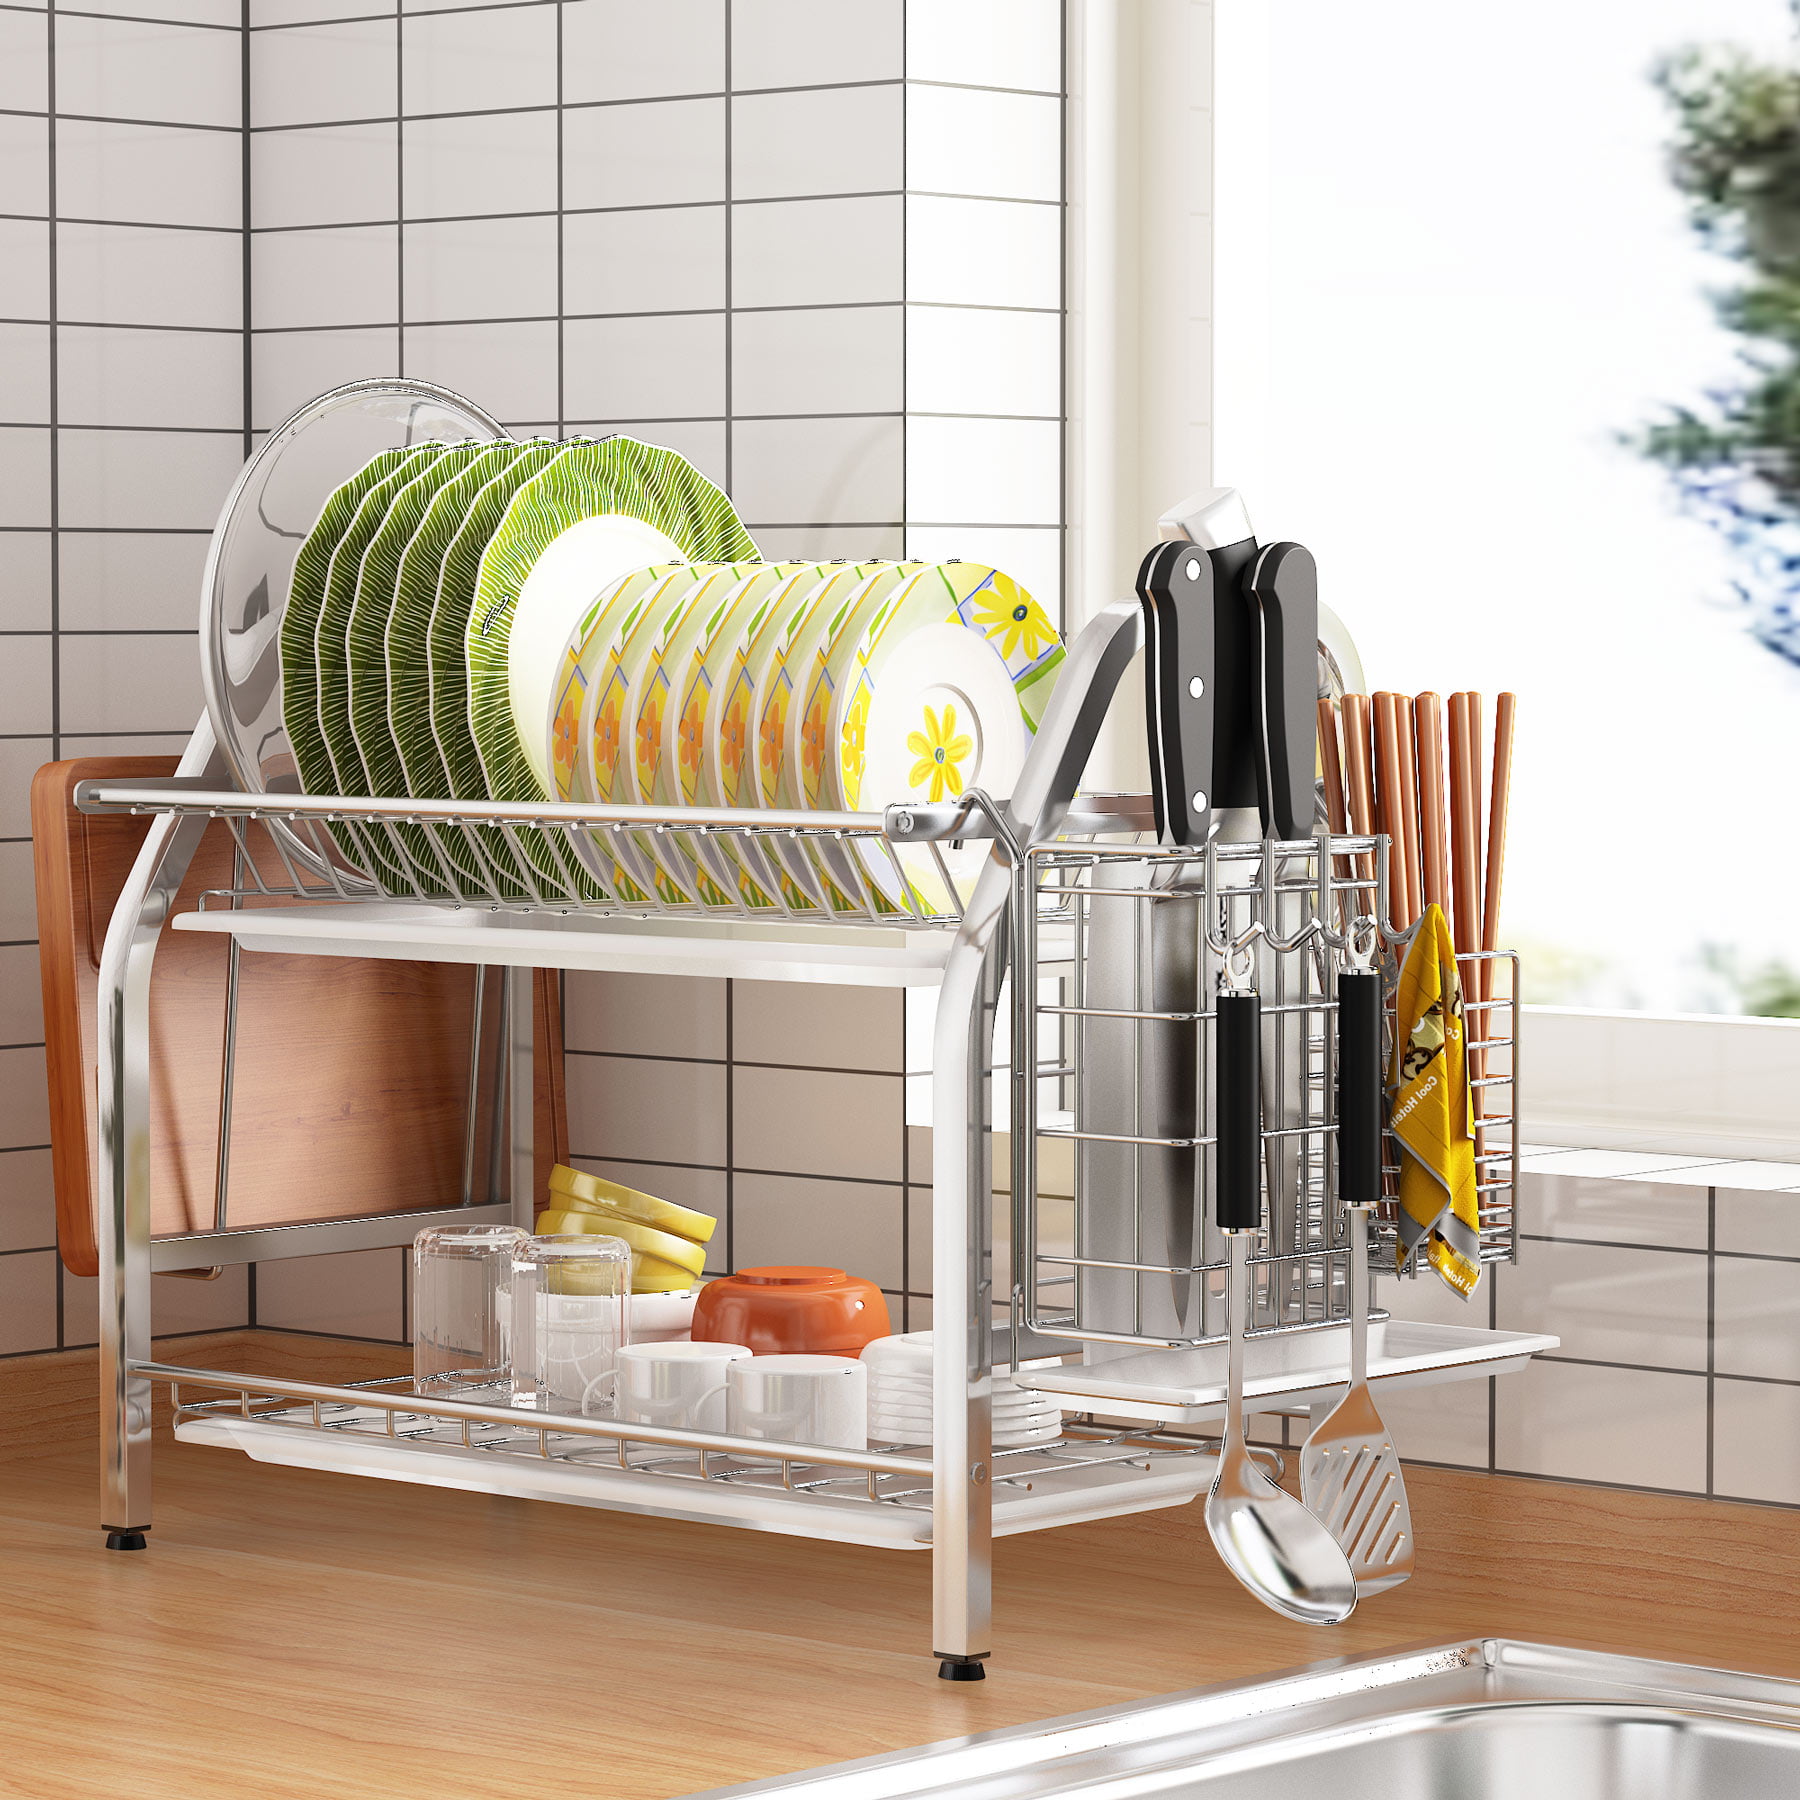 Modern Stainless Steel Collapsible Dish Kitchen Rack Drainer Holder Rust Free UK 